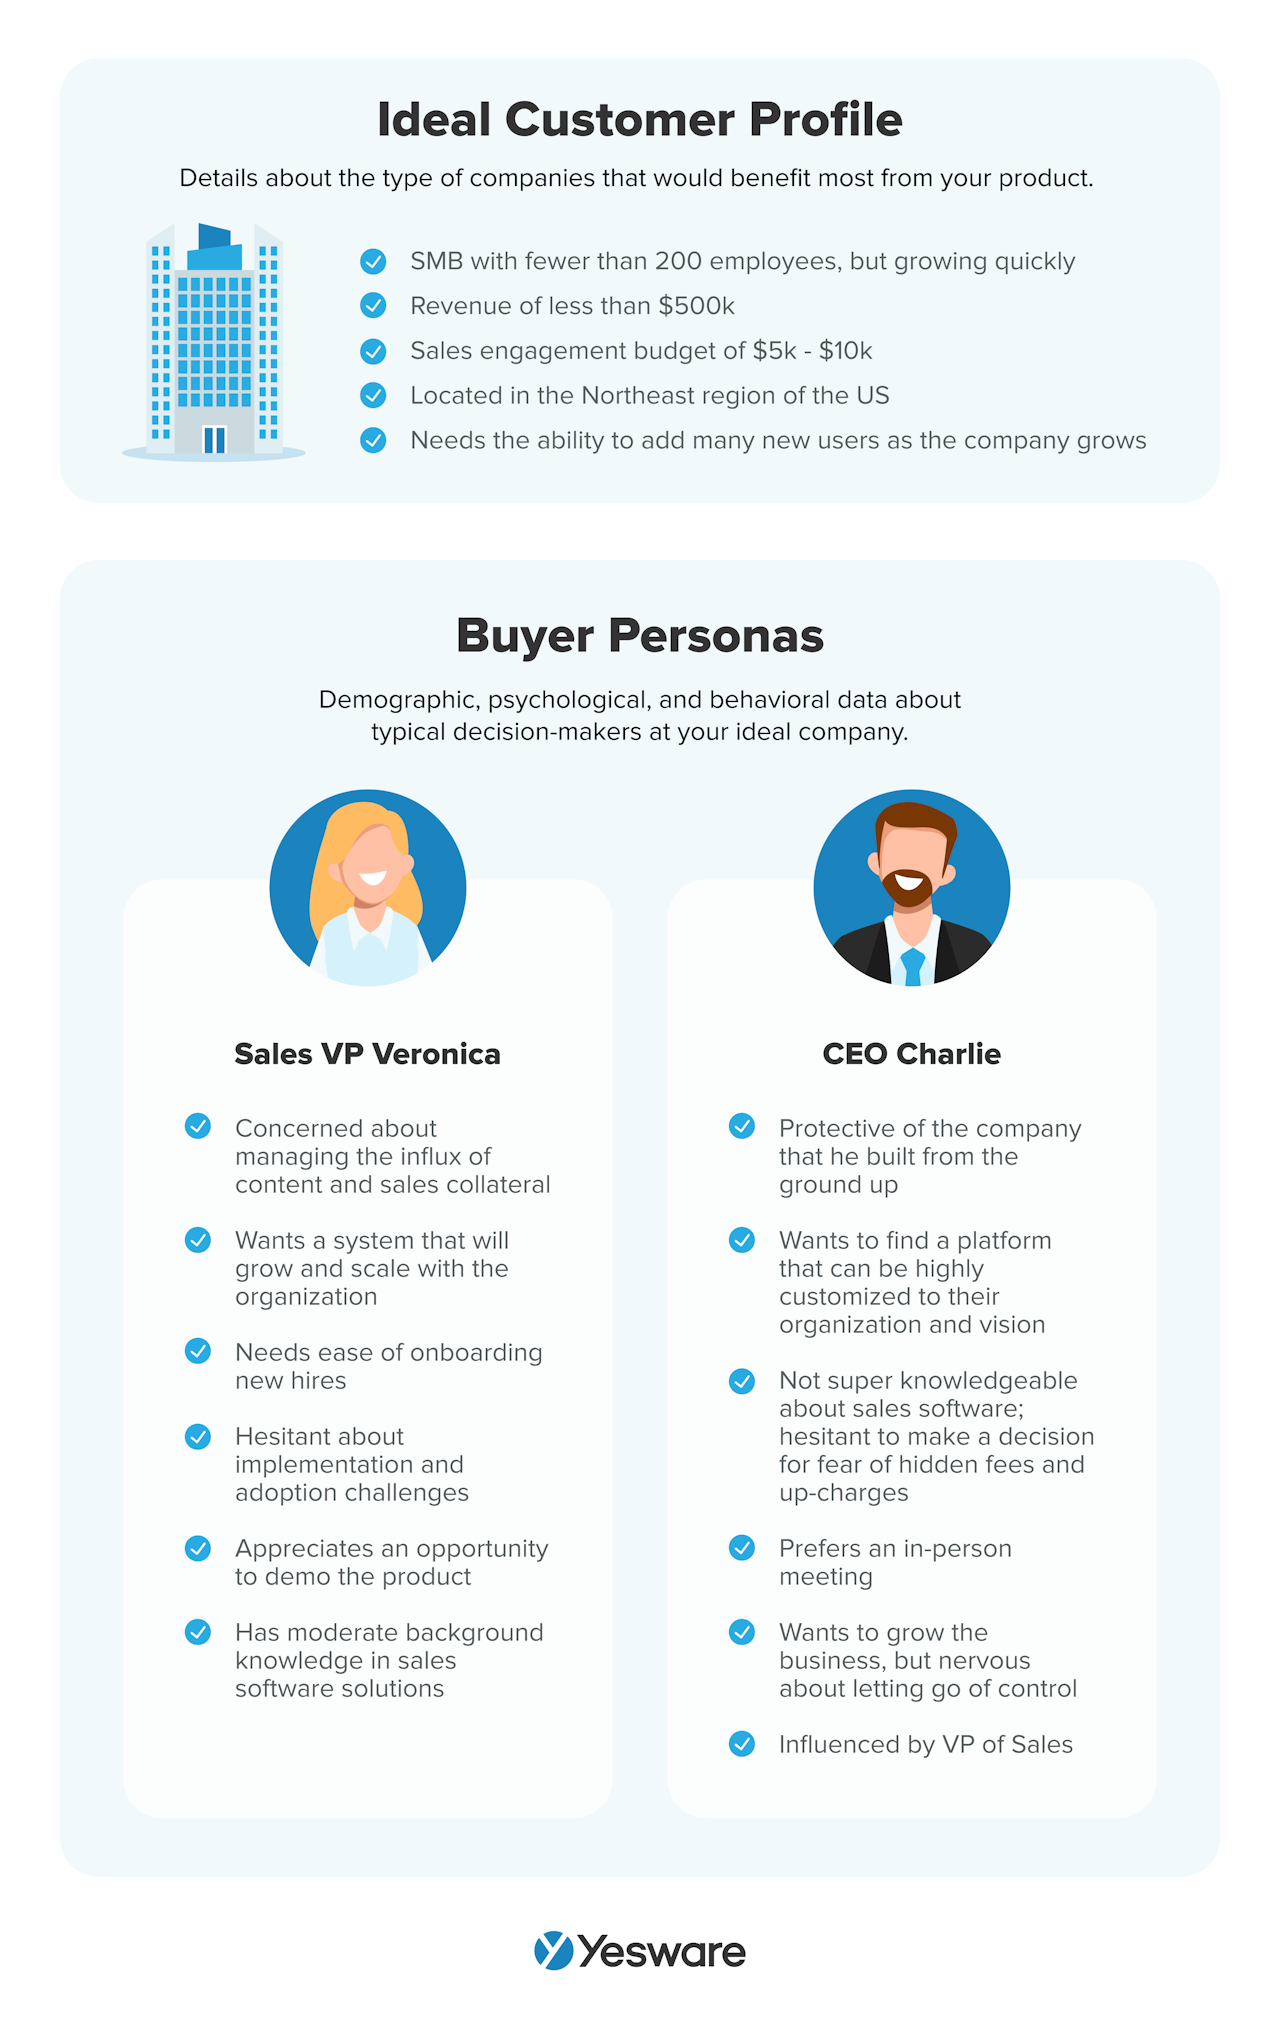 sales performance: deal customer profile and buyer persona